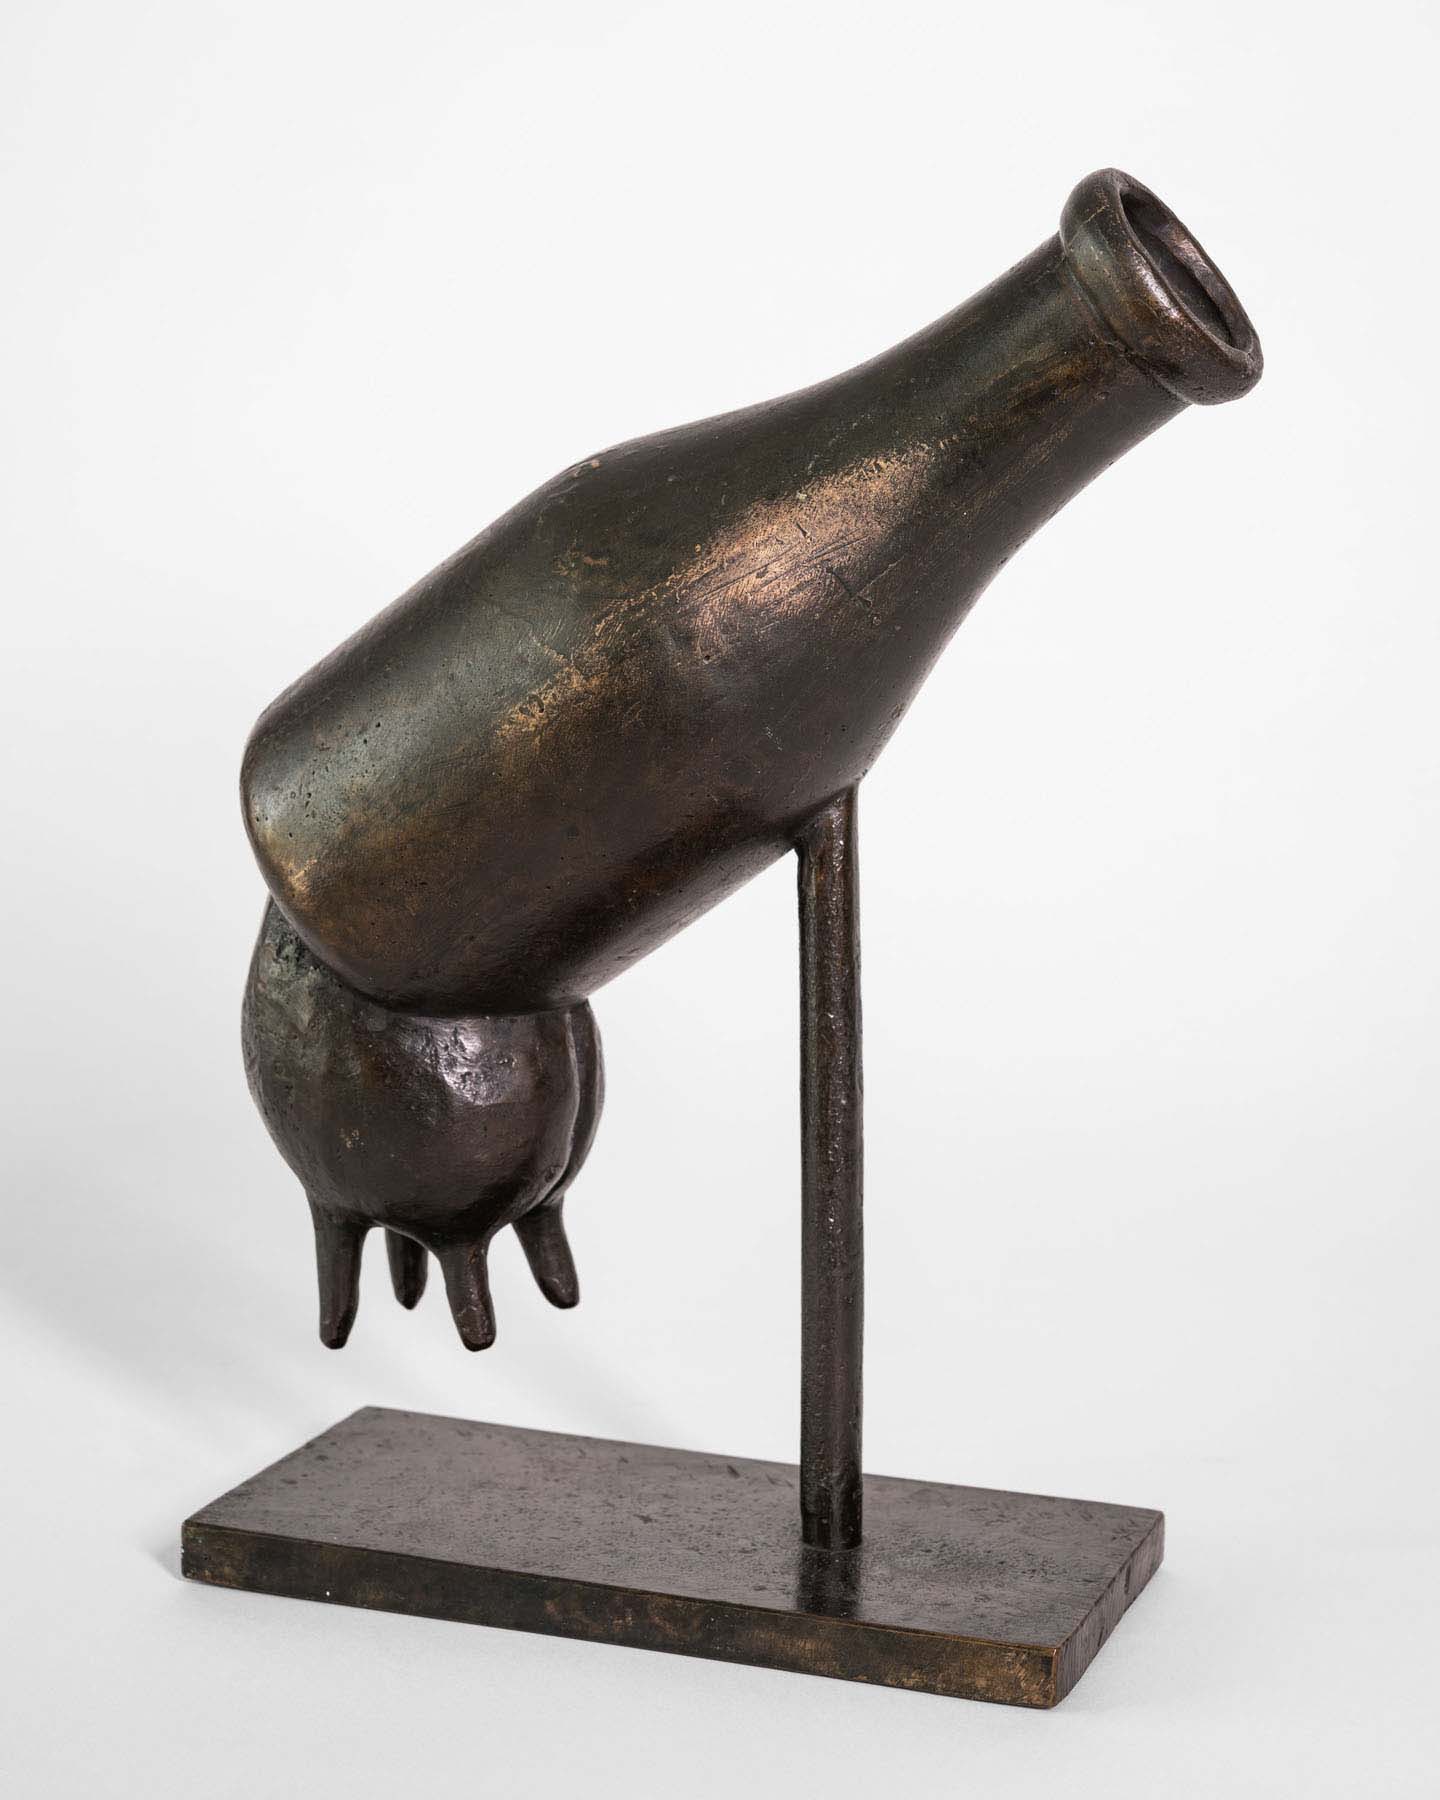 Bronze sculpture of a milk bottle with a cow udder hanging off the bottom.